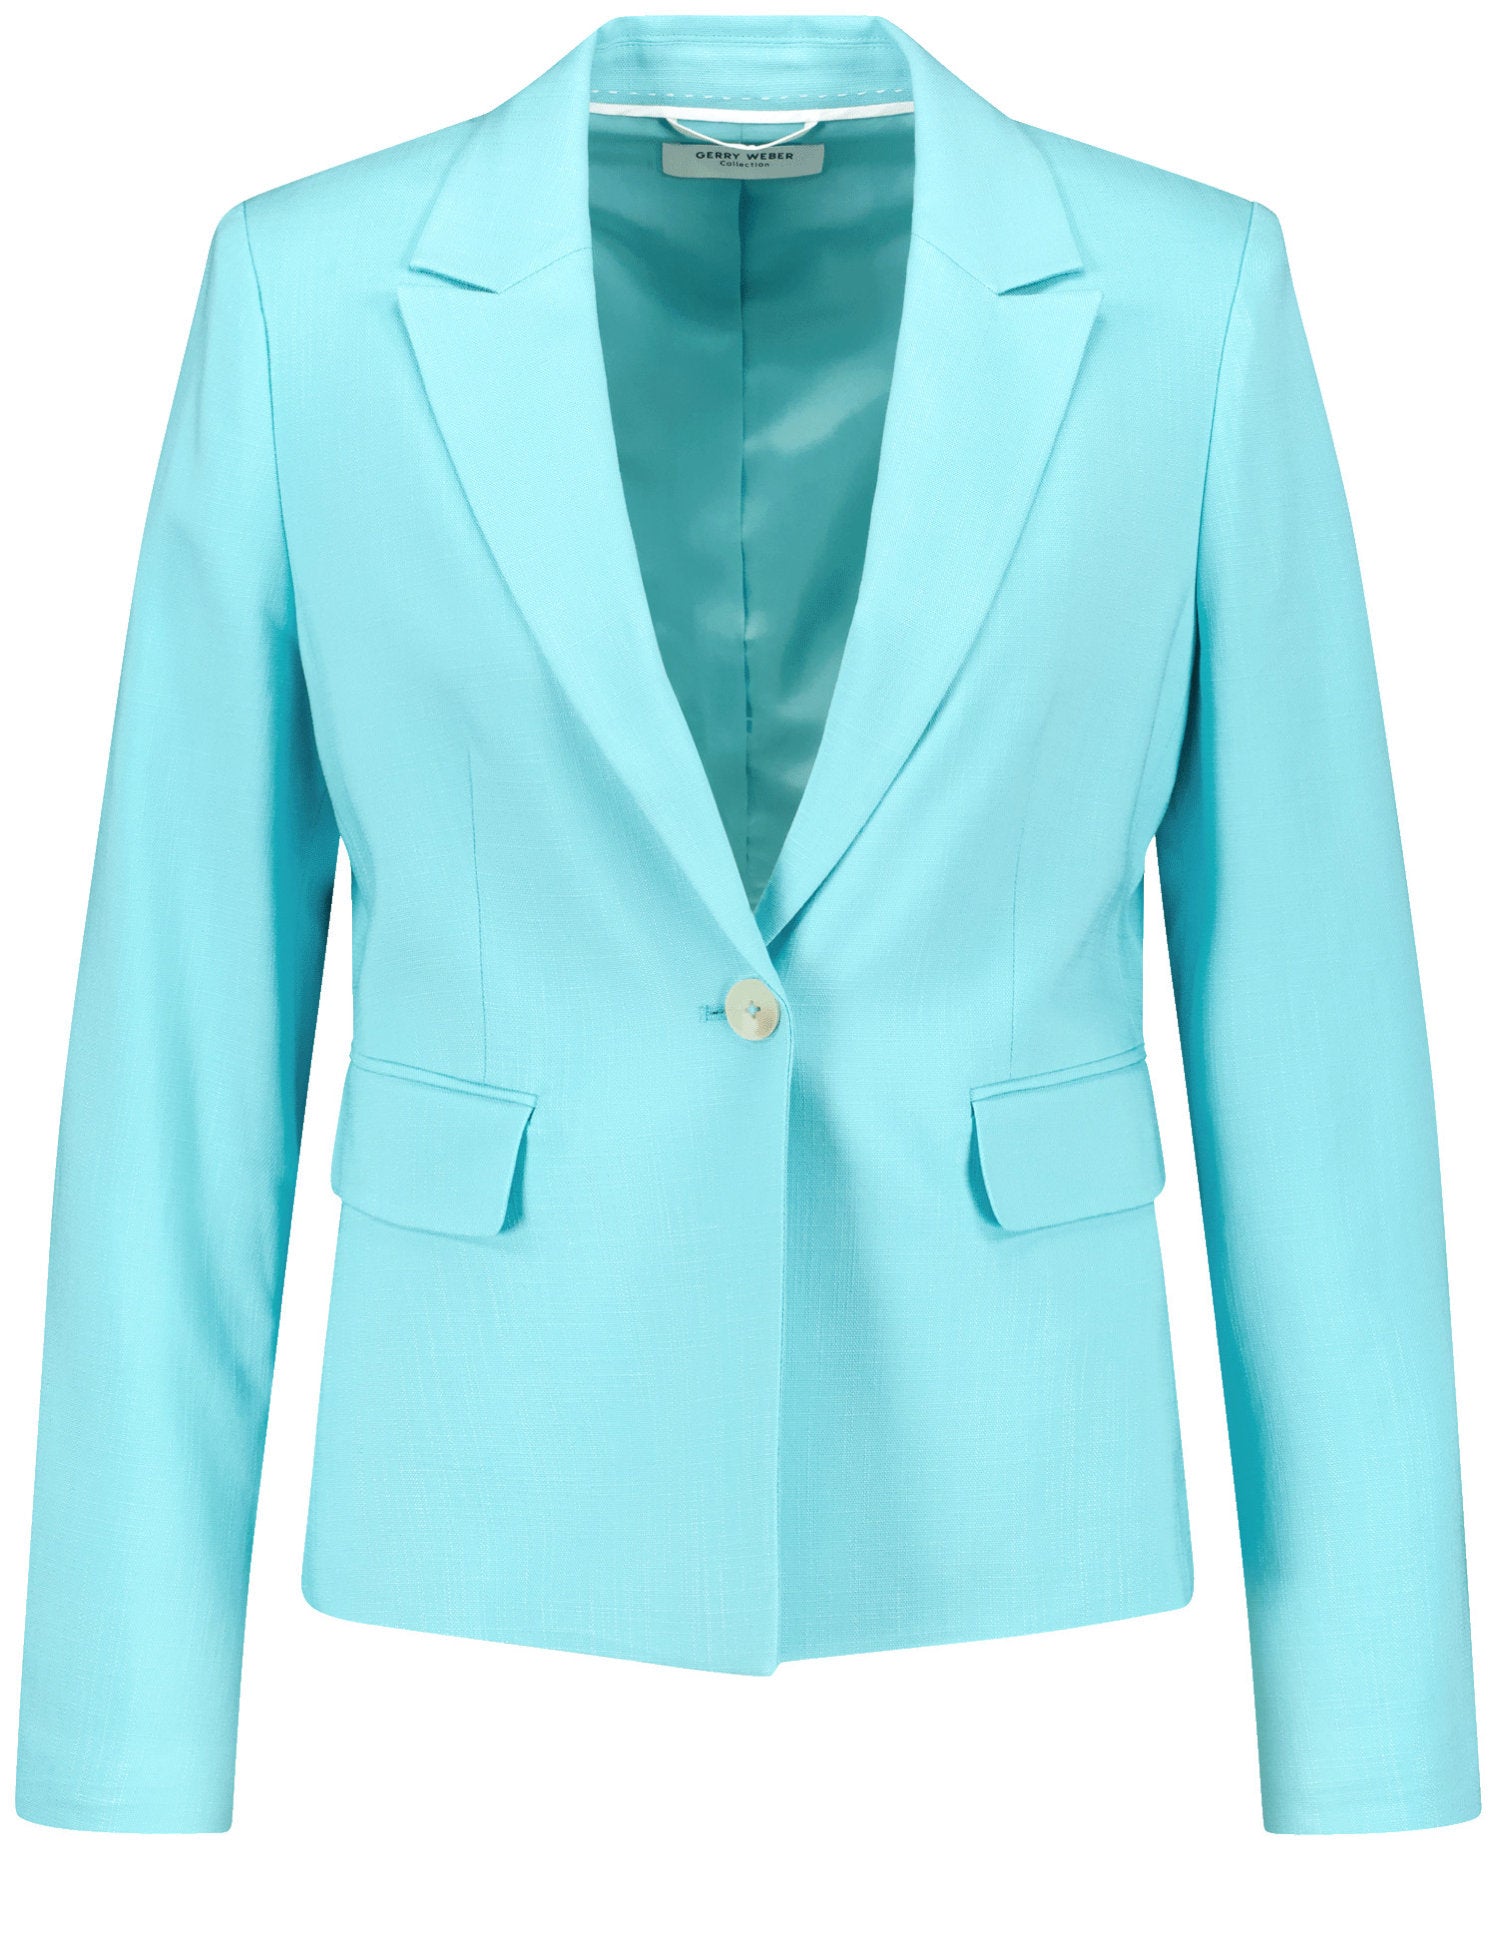 Classic Blazer With Stretch For Comfort_330063-31279_80367_07